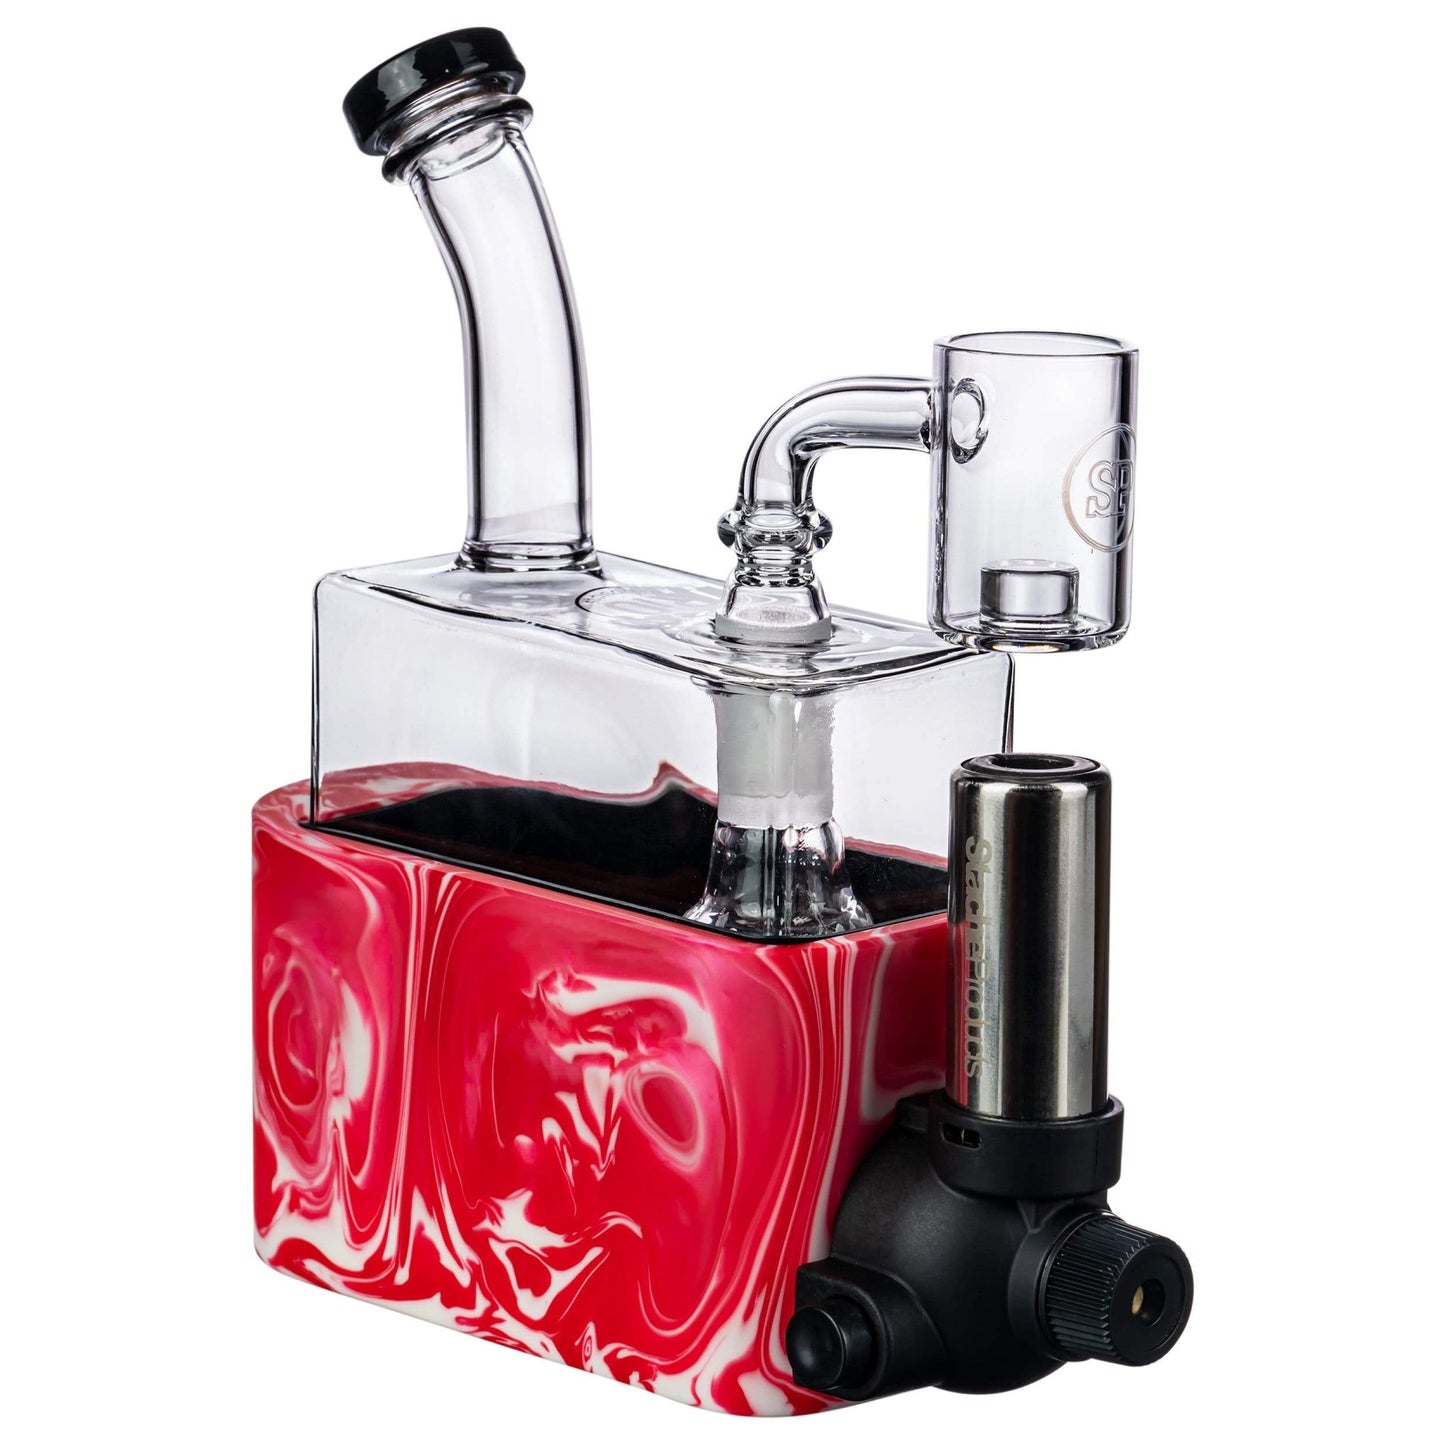 Stache Products RiO MakeOver Dab Rig Kit by Stache Products | Mission Dispensary